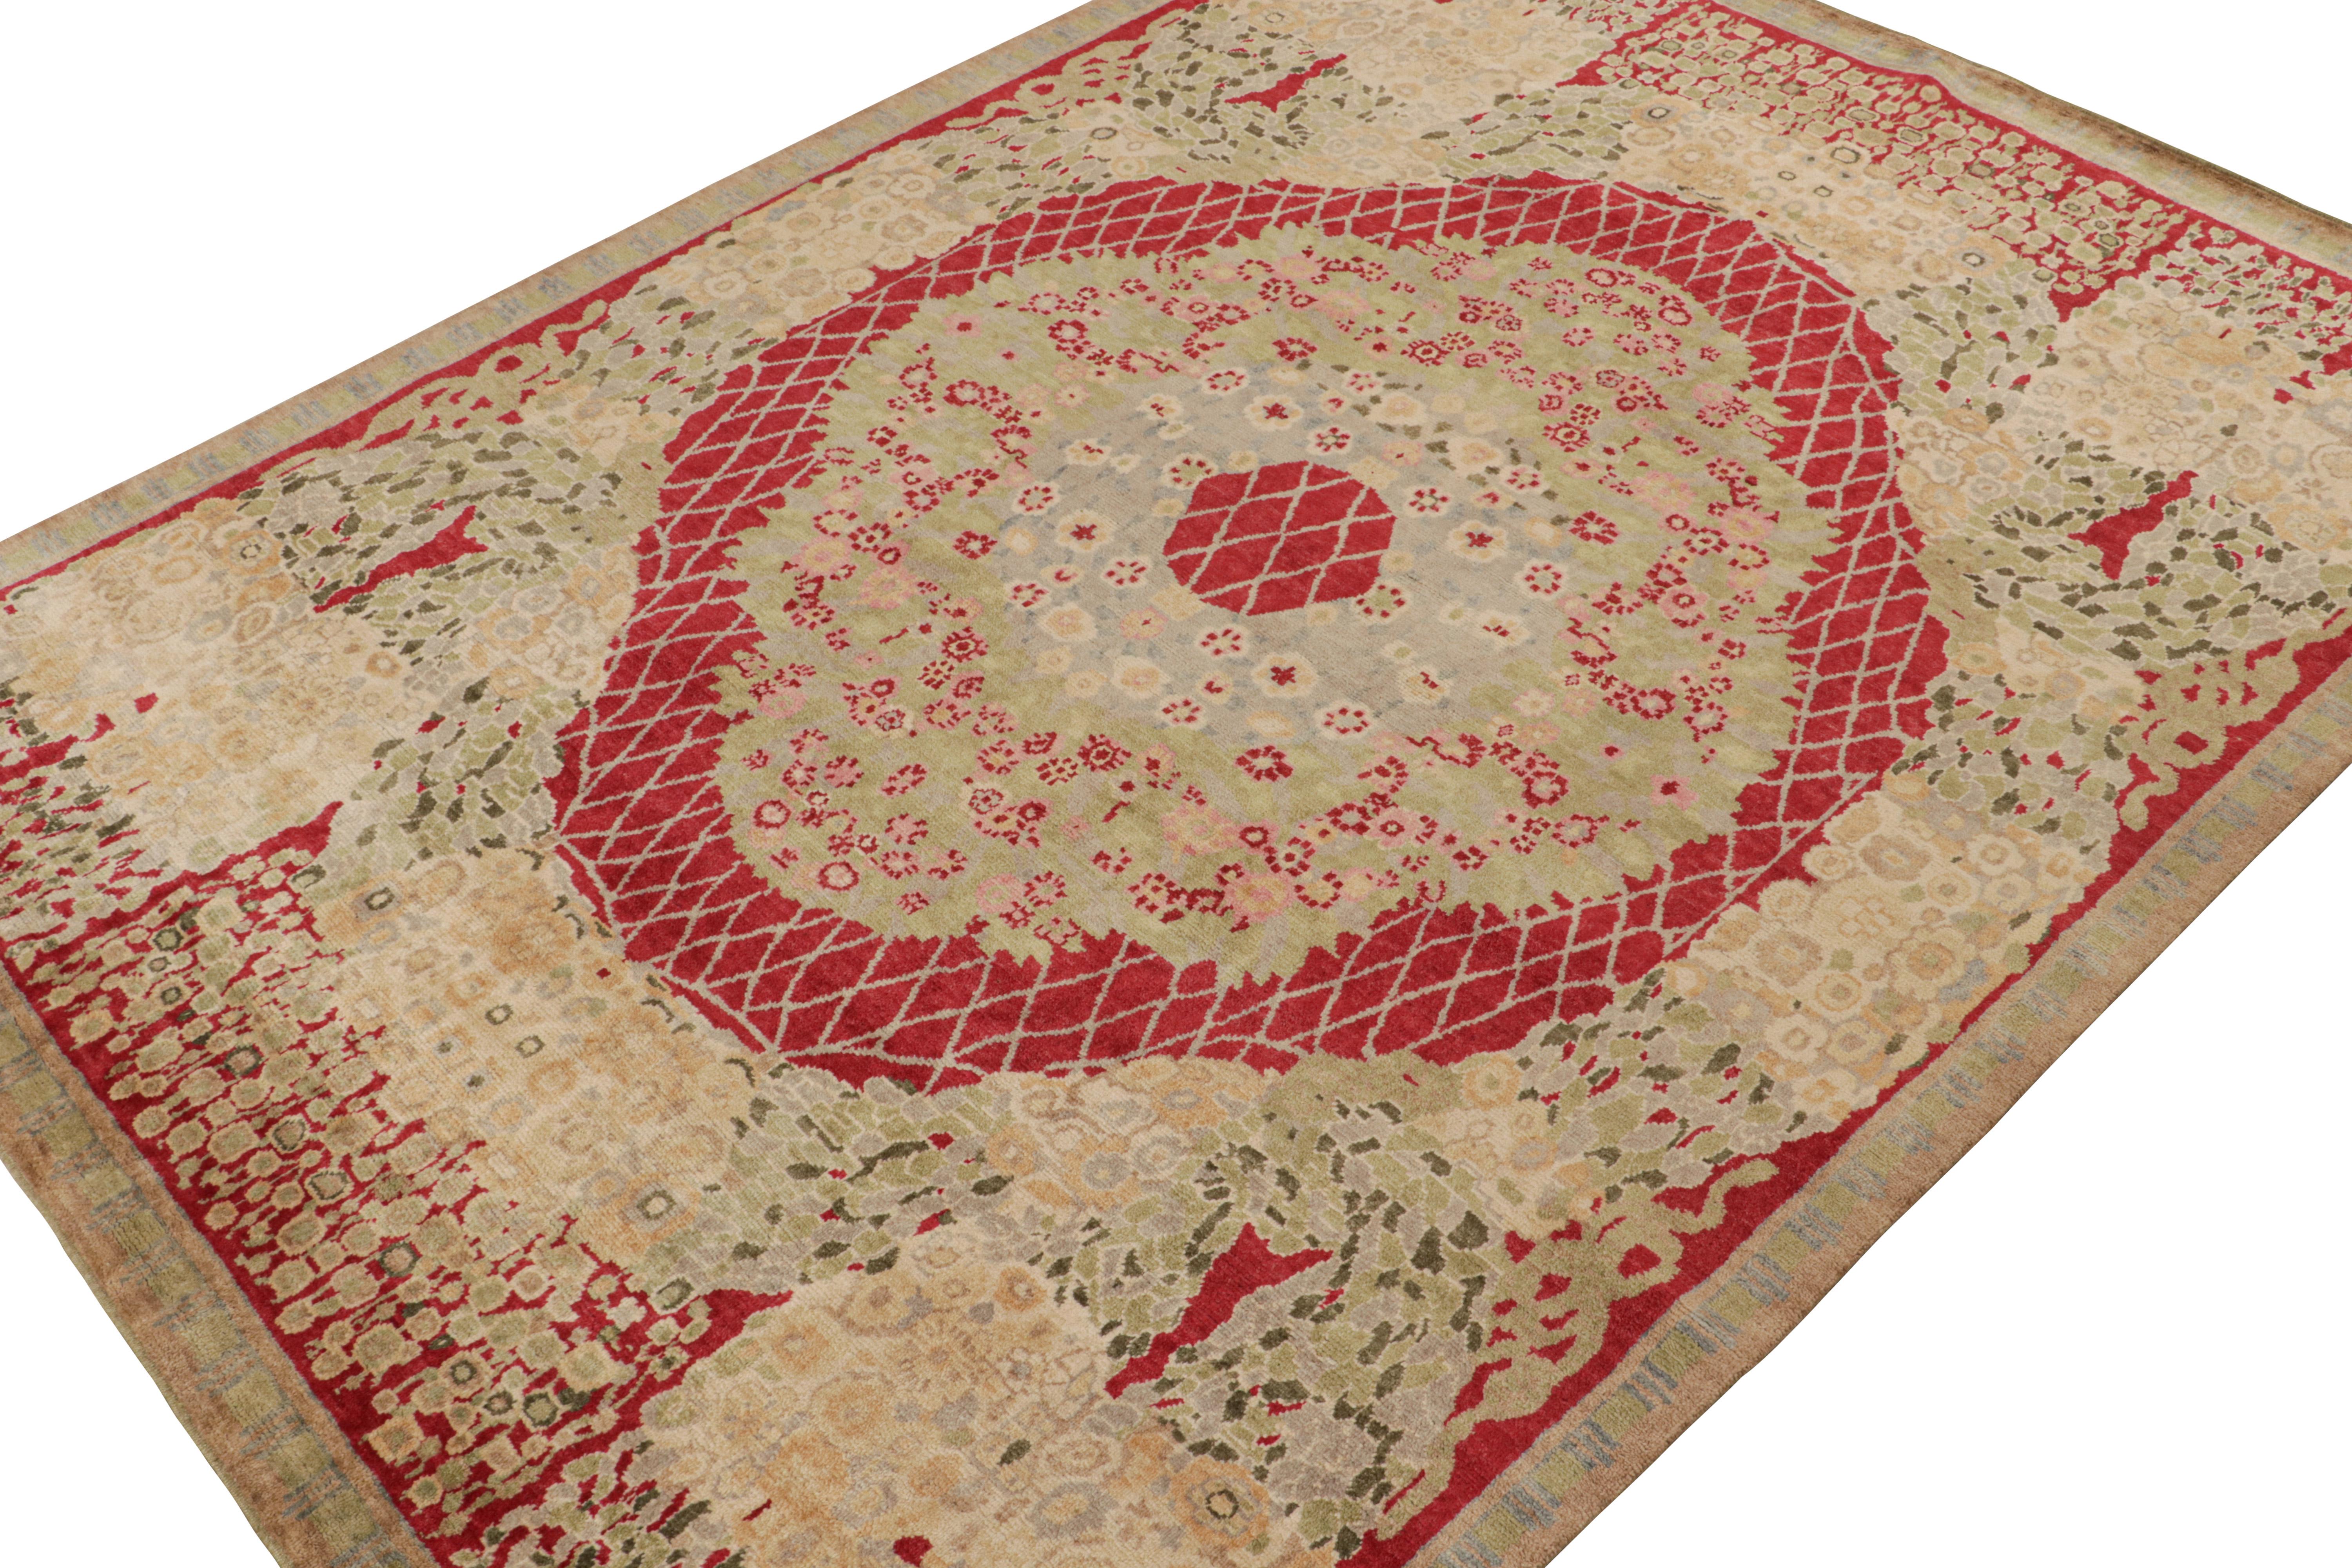 Indien Rug & Kilim's French Style Art Deco Rug in Red, Green, Gold & Blue Patterns (en anglais seulement) en vente